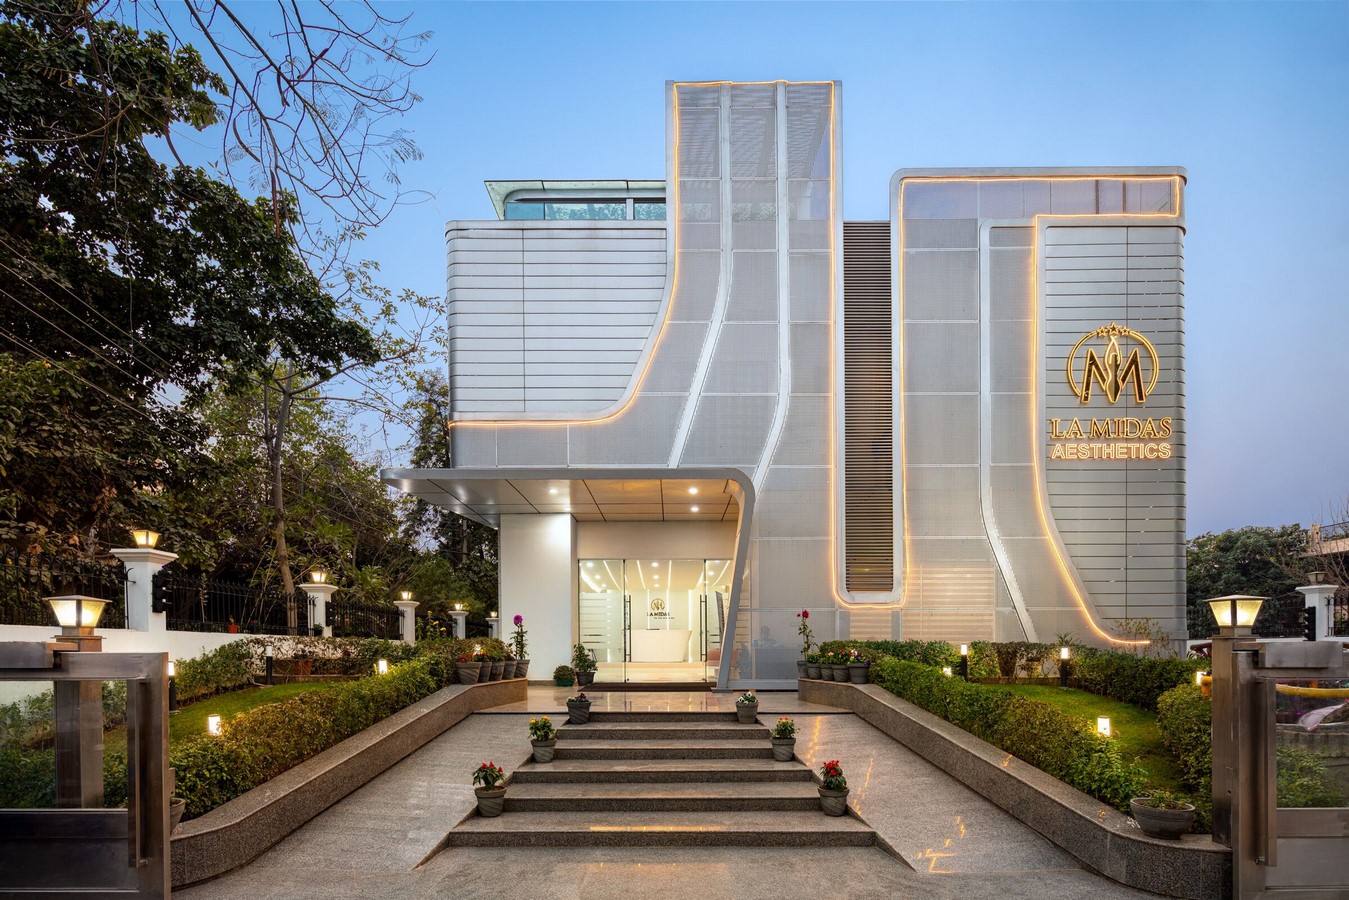 15 Places to Visit in Gurgaon for Travelling Architect - Sheet1